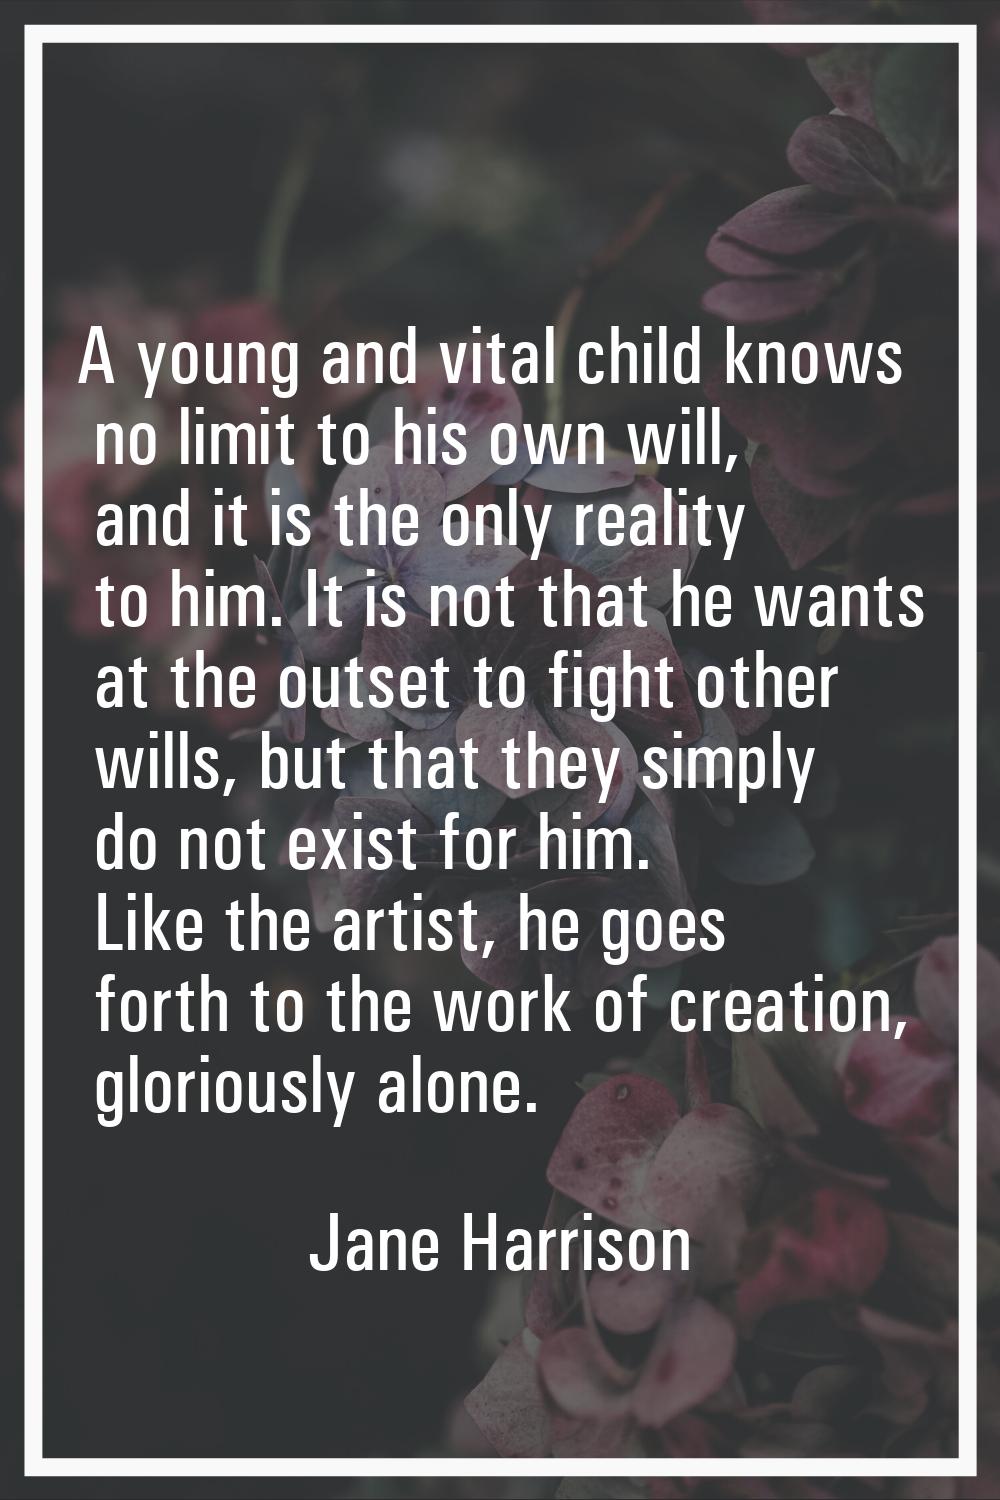 A young and vital child knows no limit to his own will, and it is the only reality to him. It is no